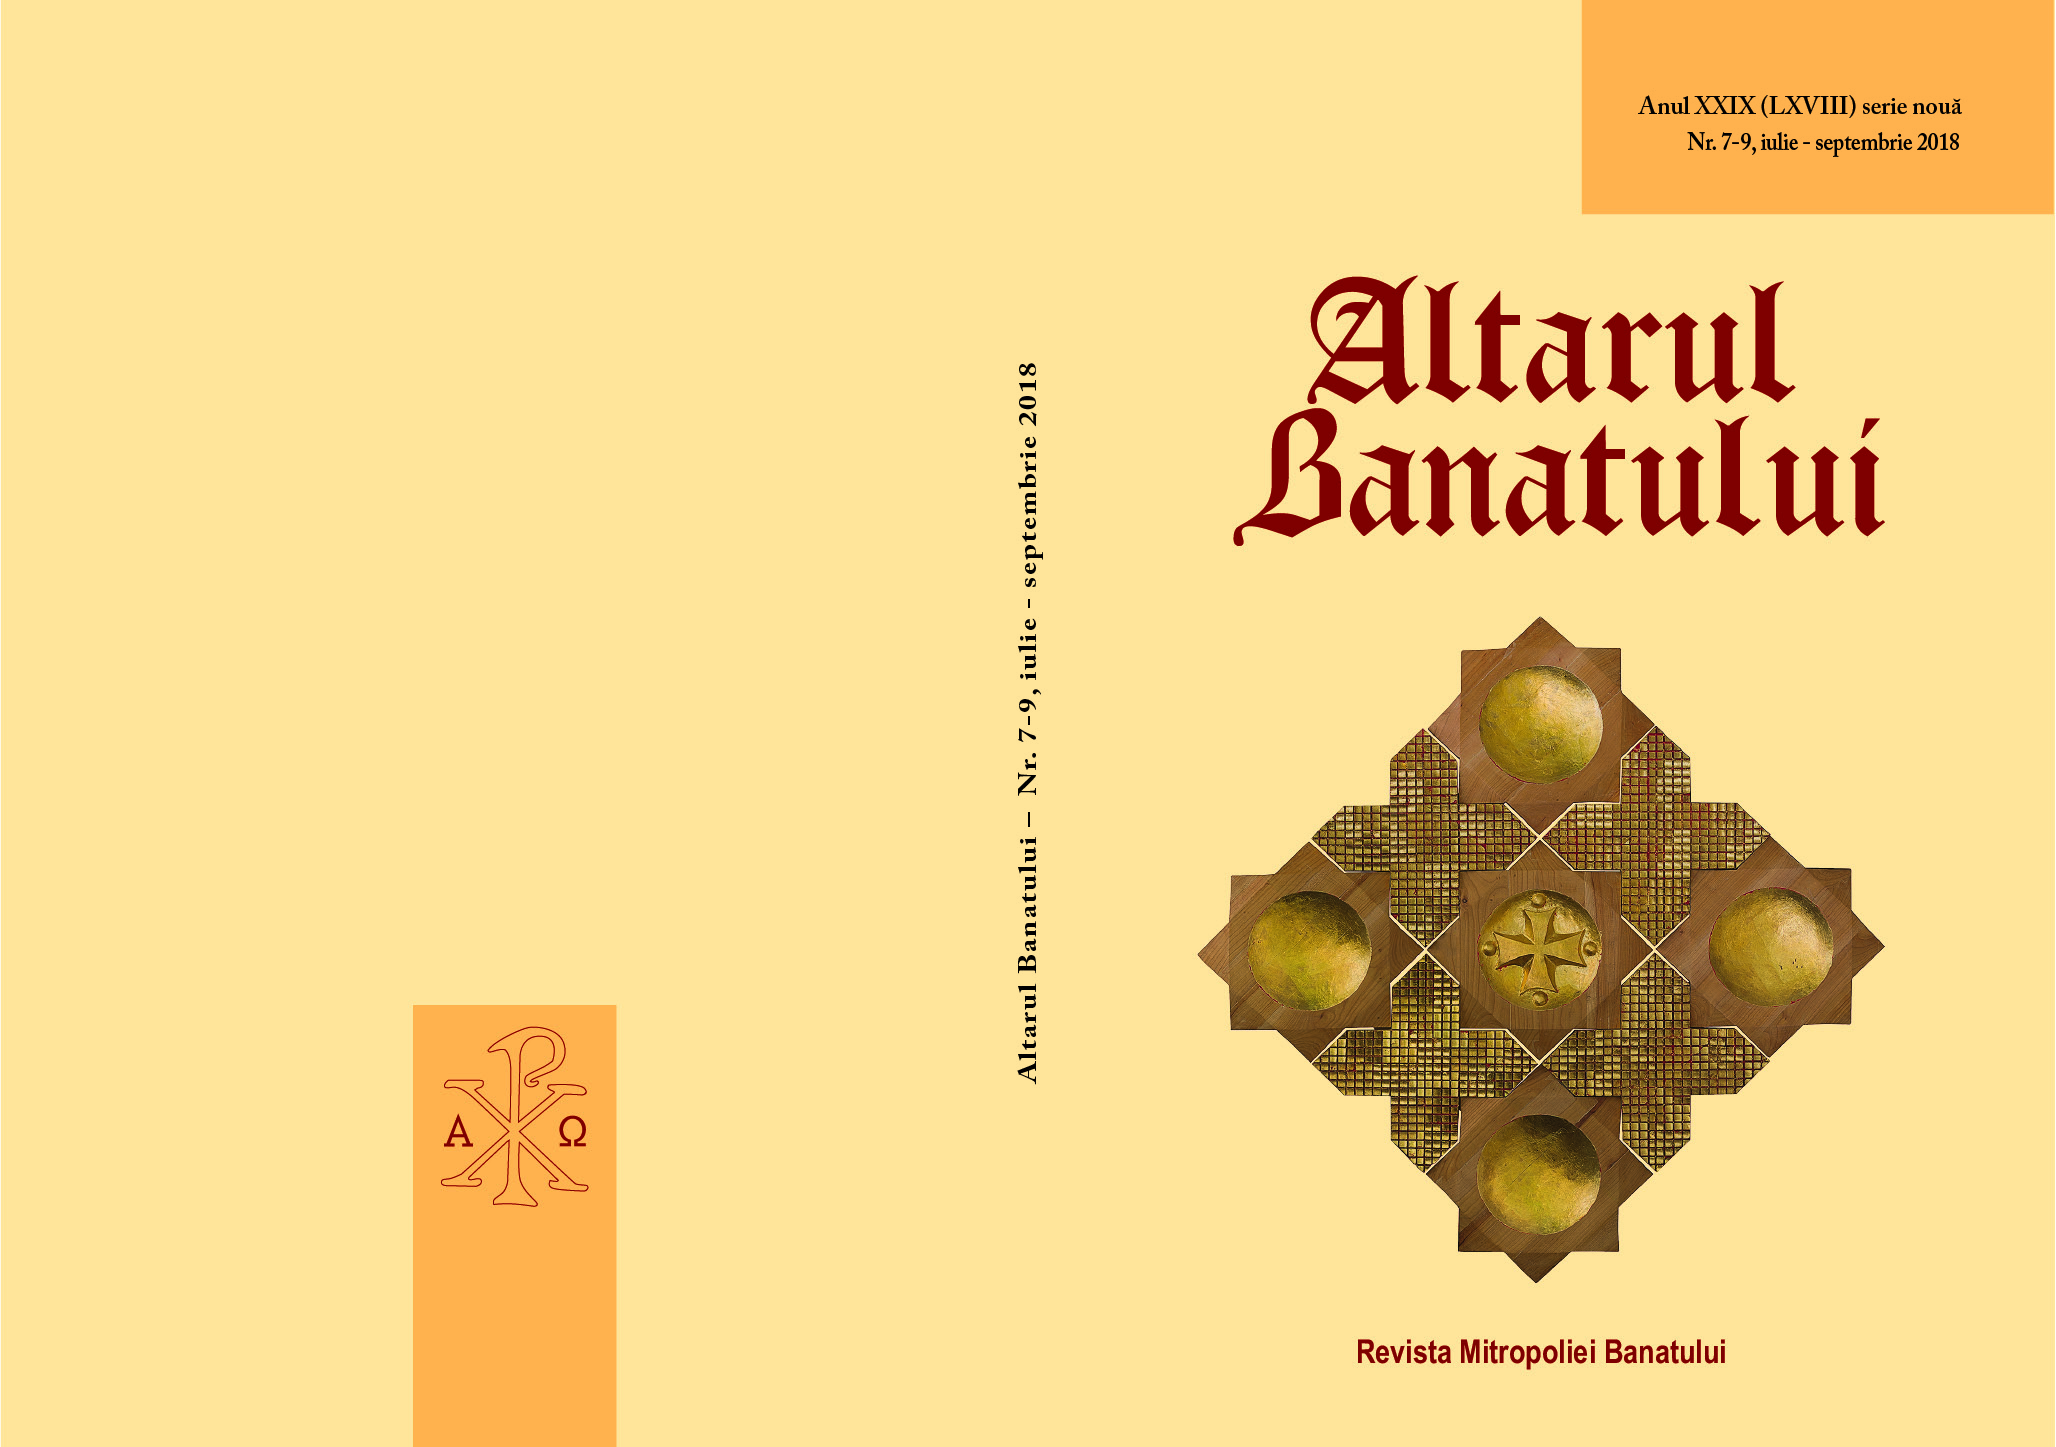 THE MEDIEVAL HISTORY OF BANAT REFLECTED IN THE WORKS OF IULIU VUIA  (II) Cover Image